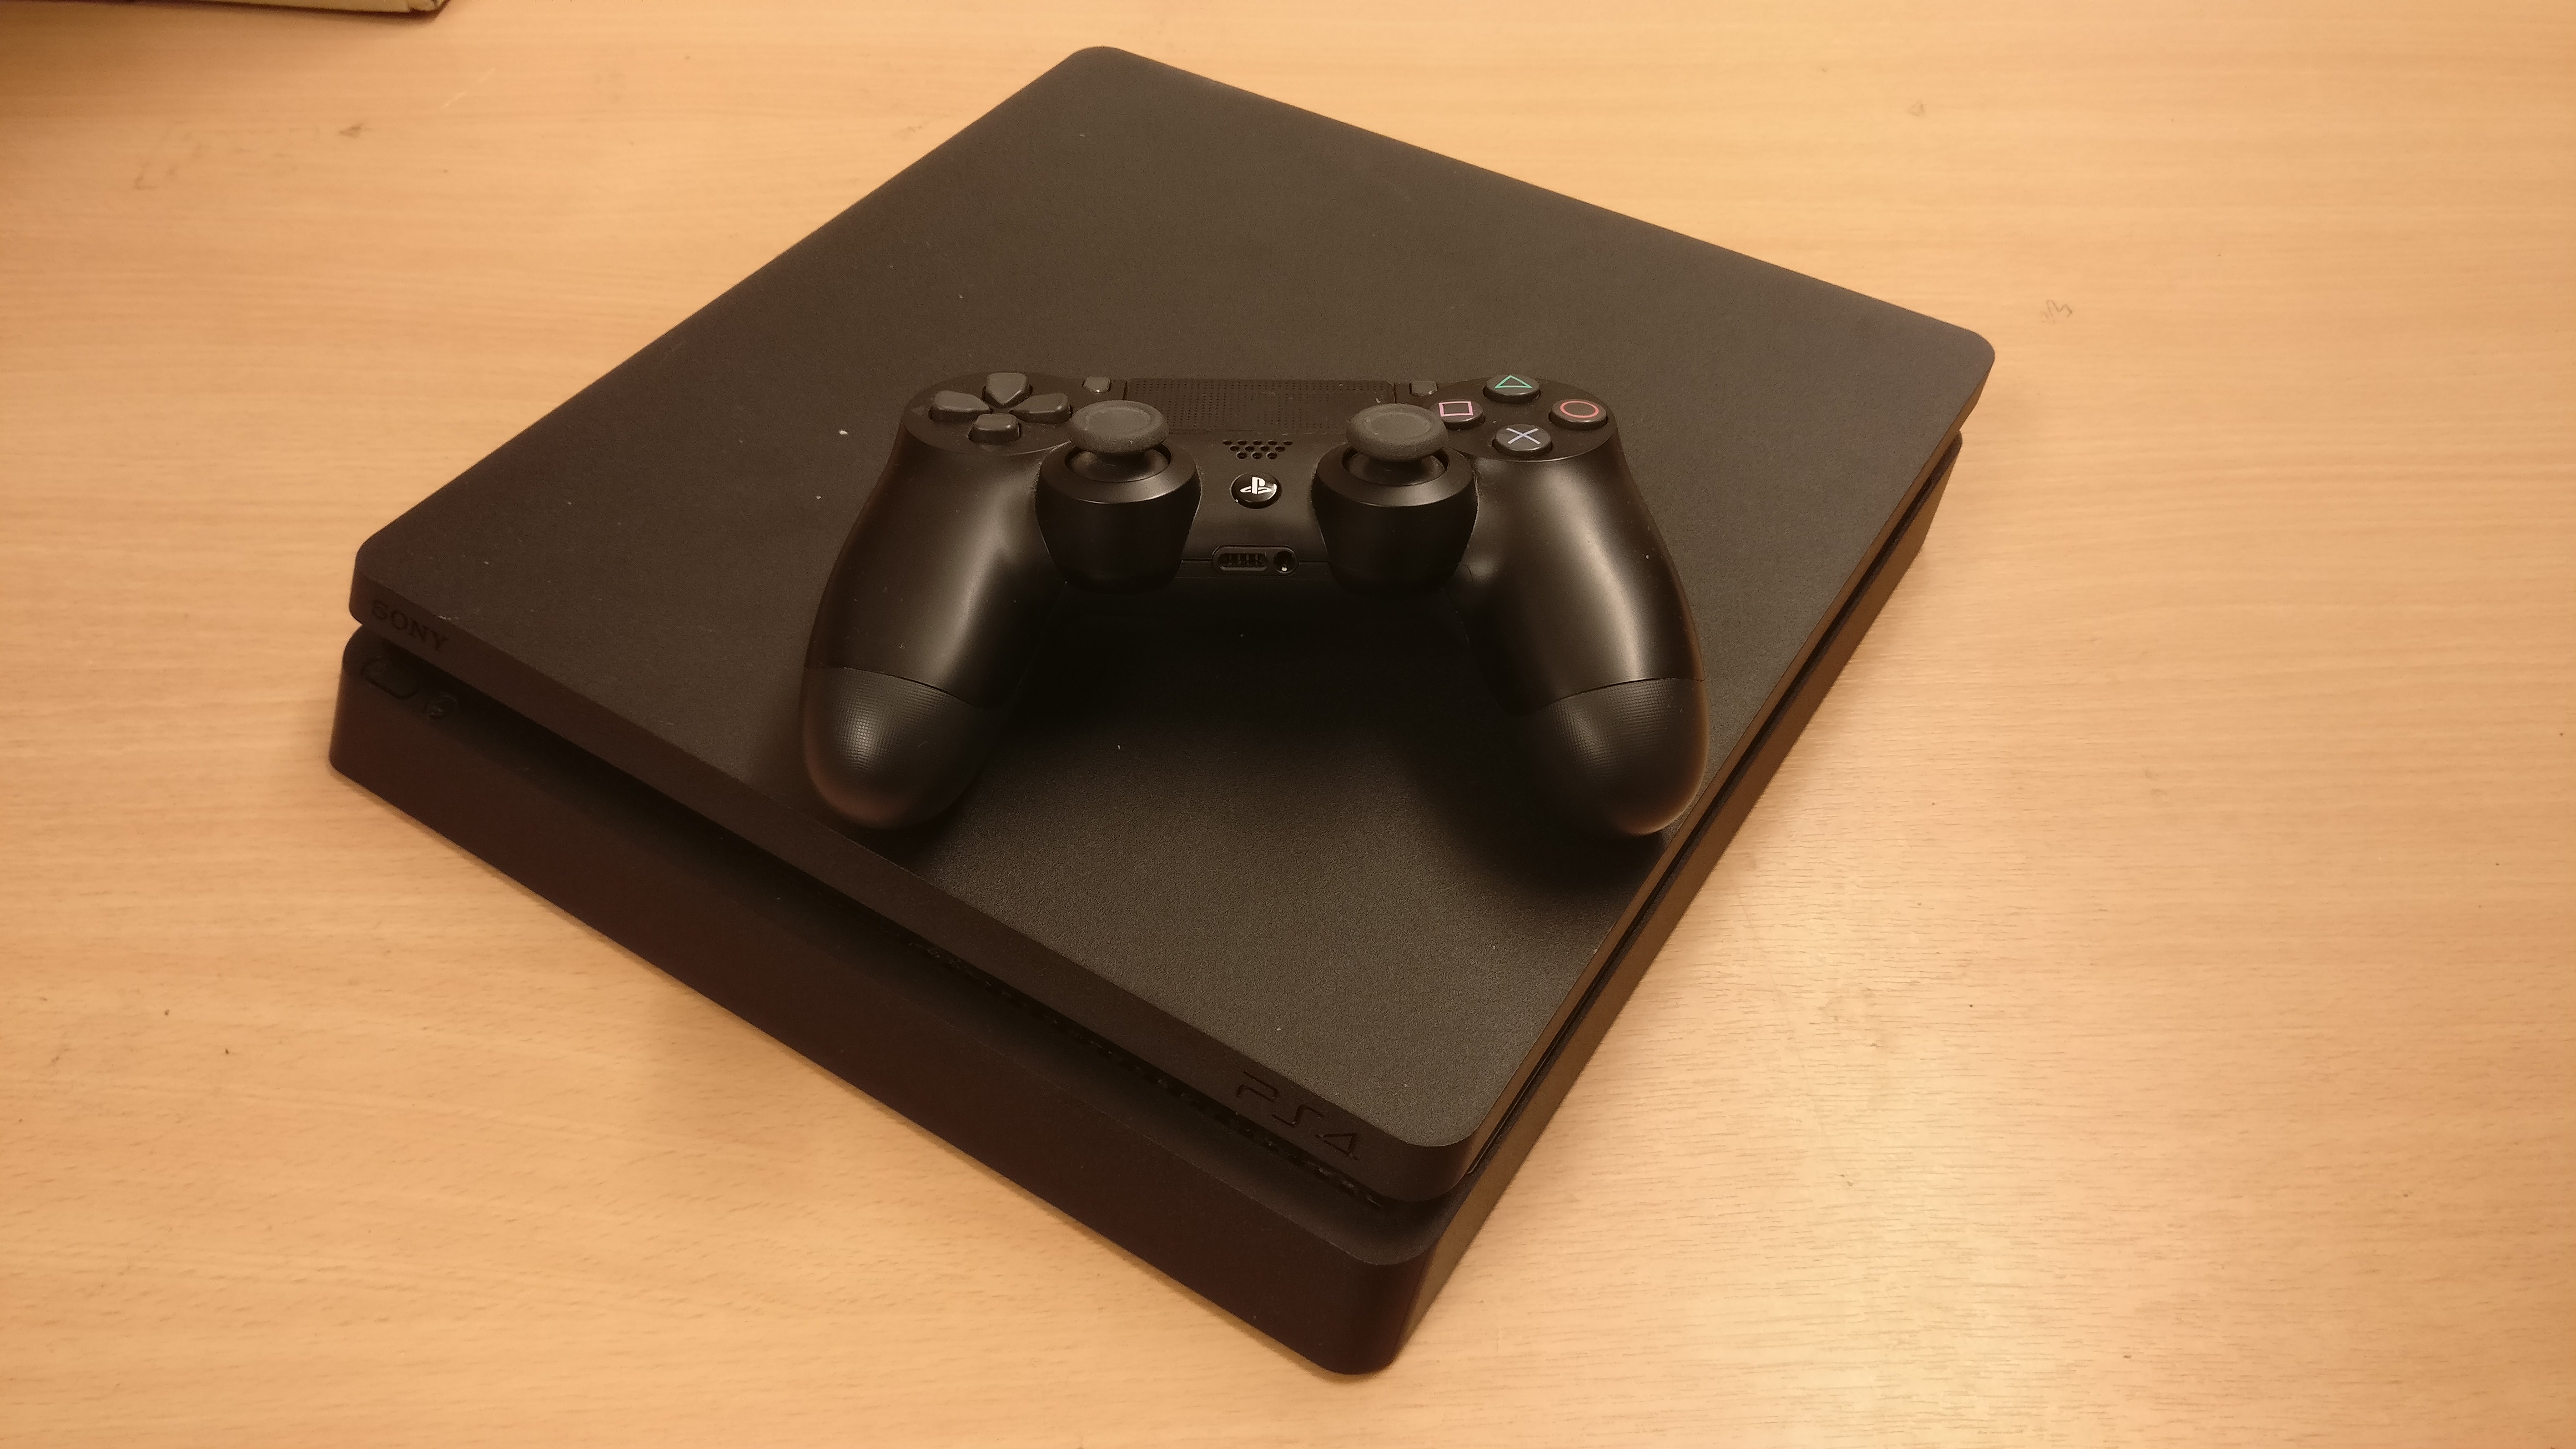 Is your PlayStation 4 Slim Damaged?